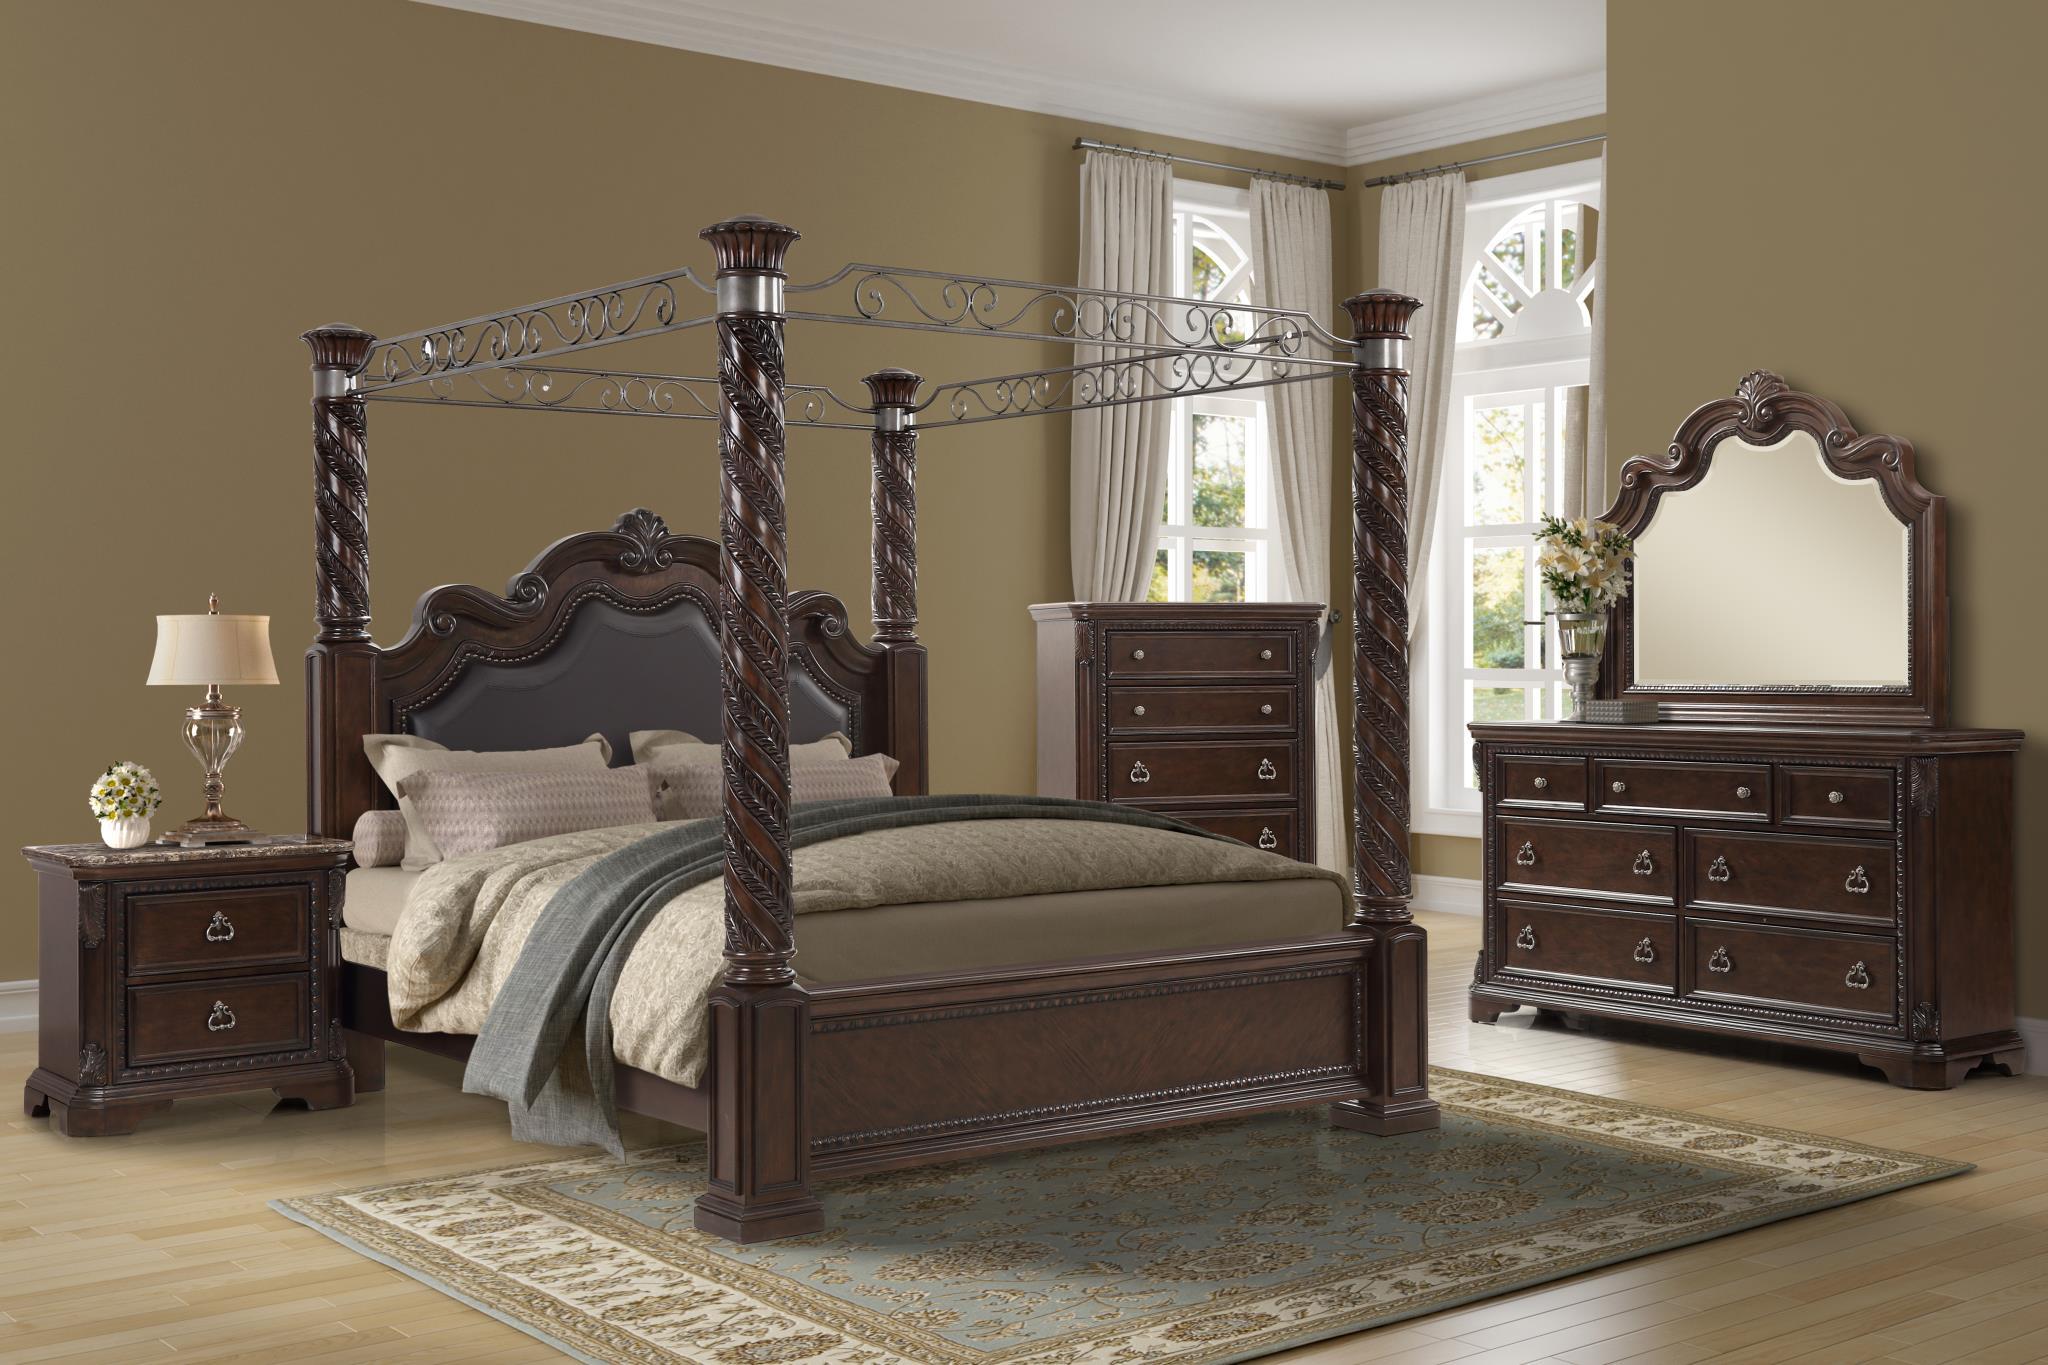 Modern, Transitional Canopy Bedroom Set COVENTRY 1988-108-Set-6 1988-108-2NDMC-6PC in Mahogany Bonded Leather